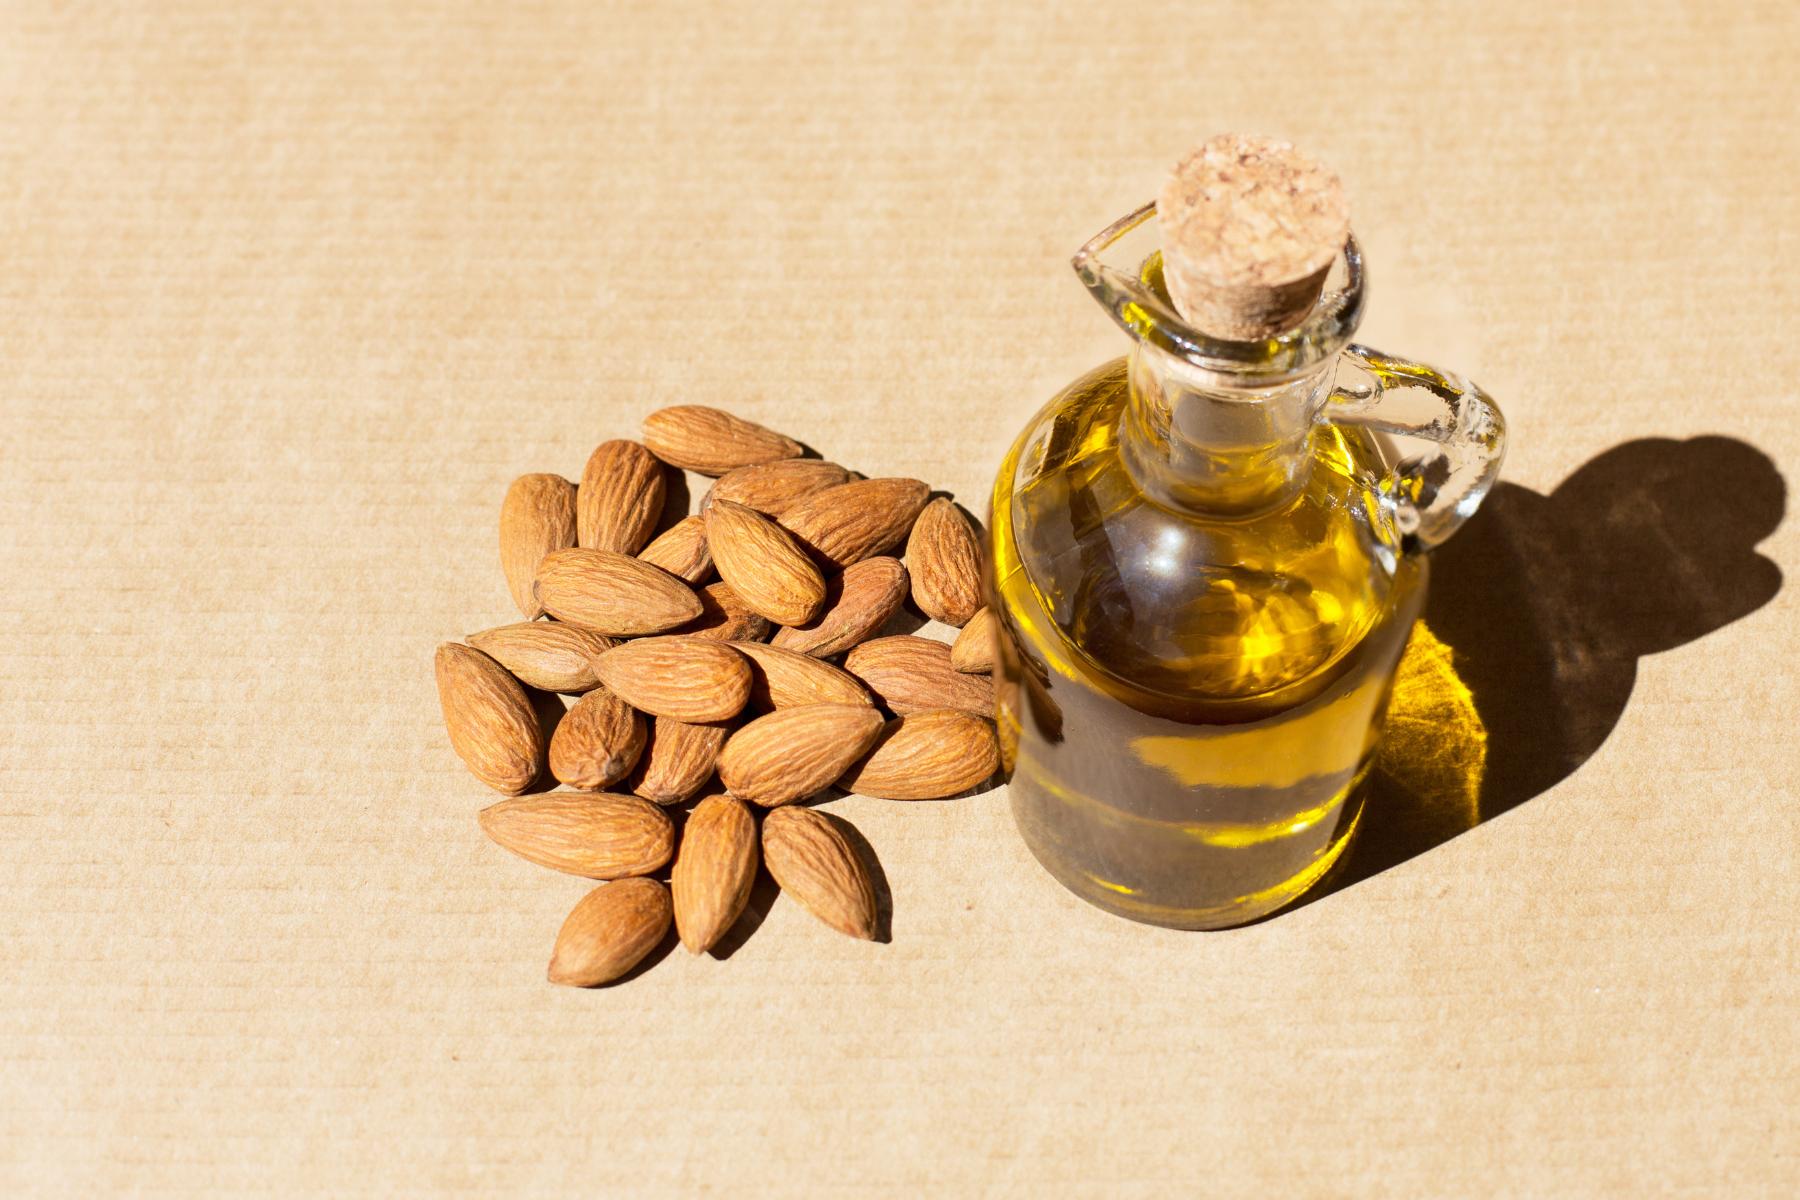 5 Sweet Almond Oil Benefits That Lead to Better Skin - A vile of glowing sweet almond oil on a wooden table.